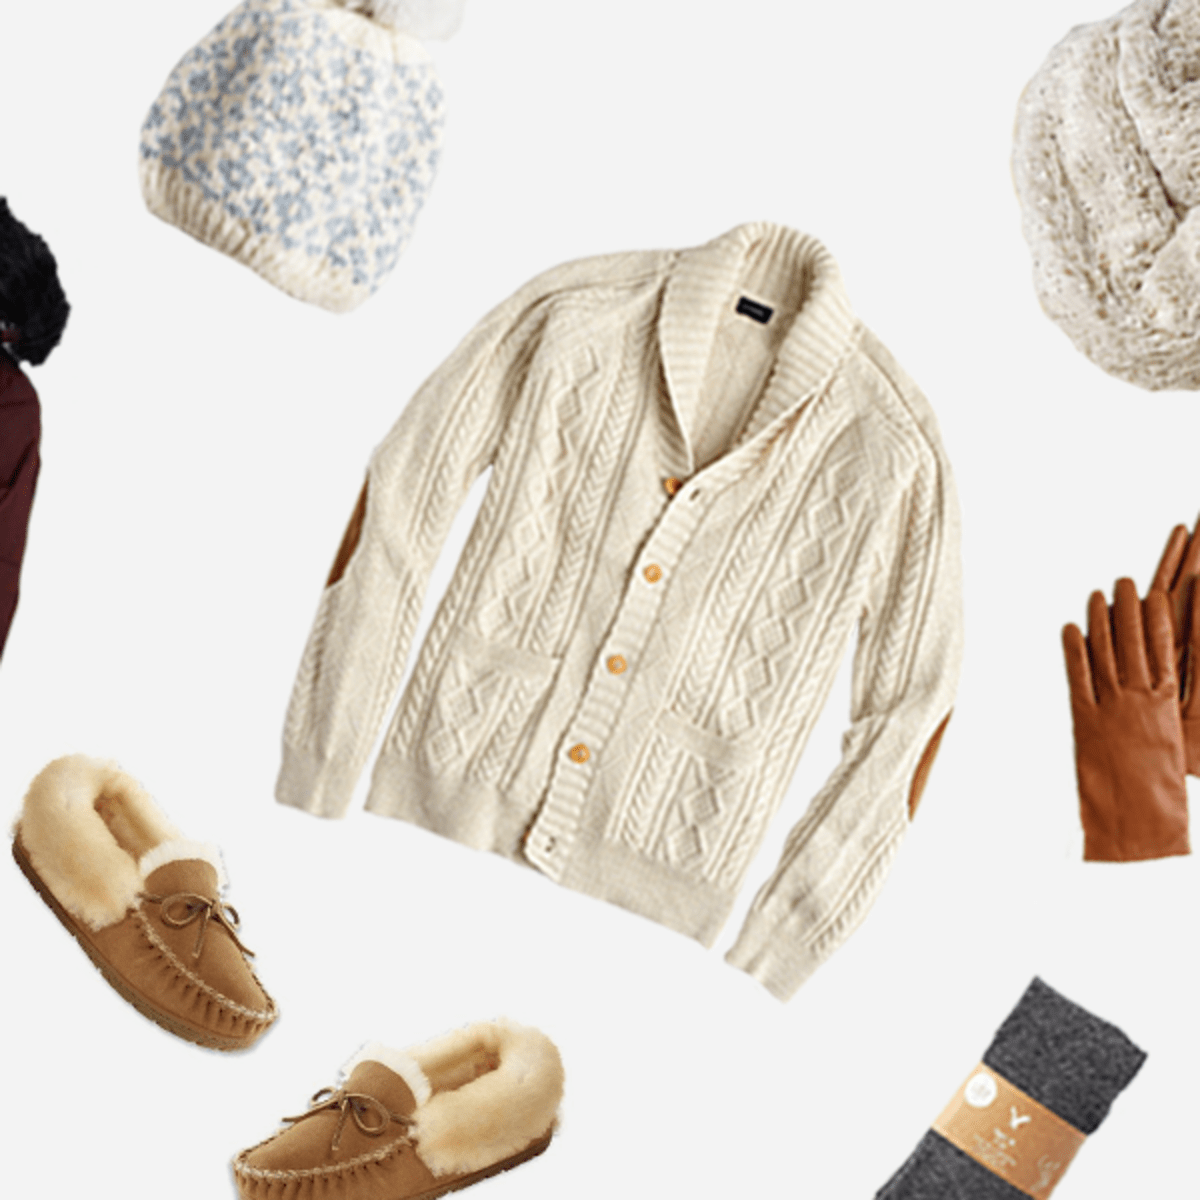 Wear your woolies: Cold weather essentials